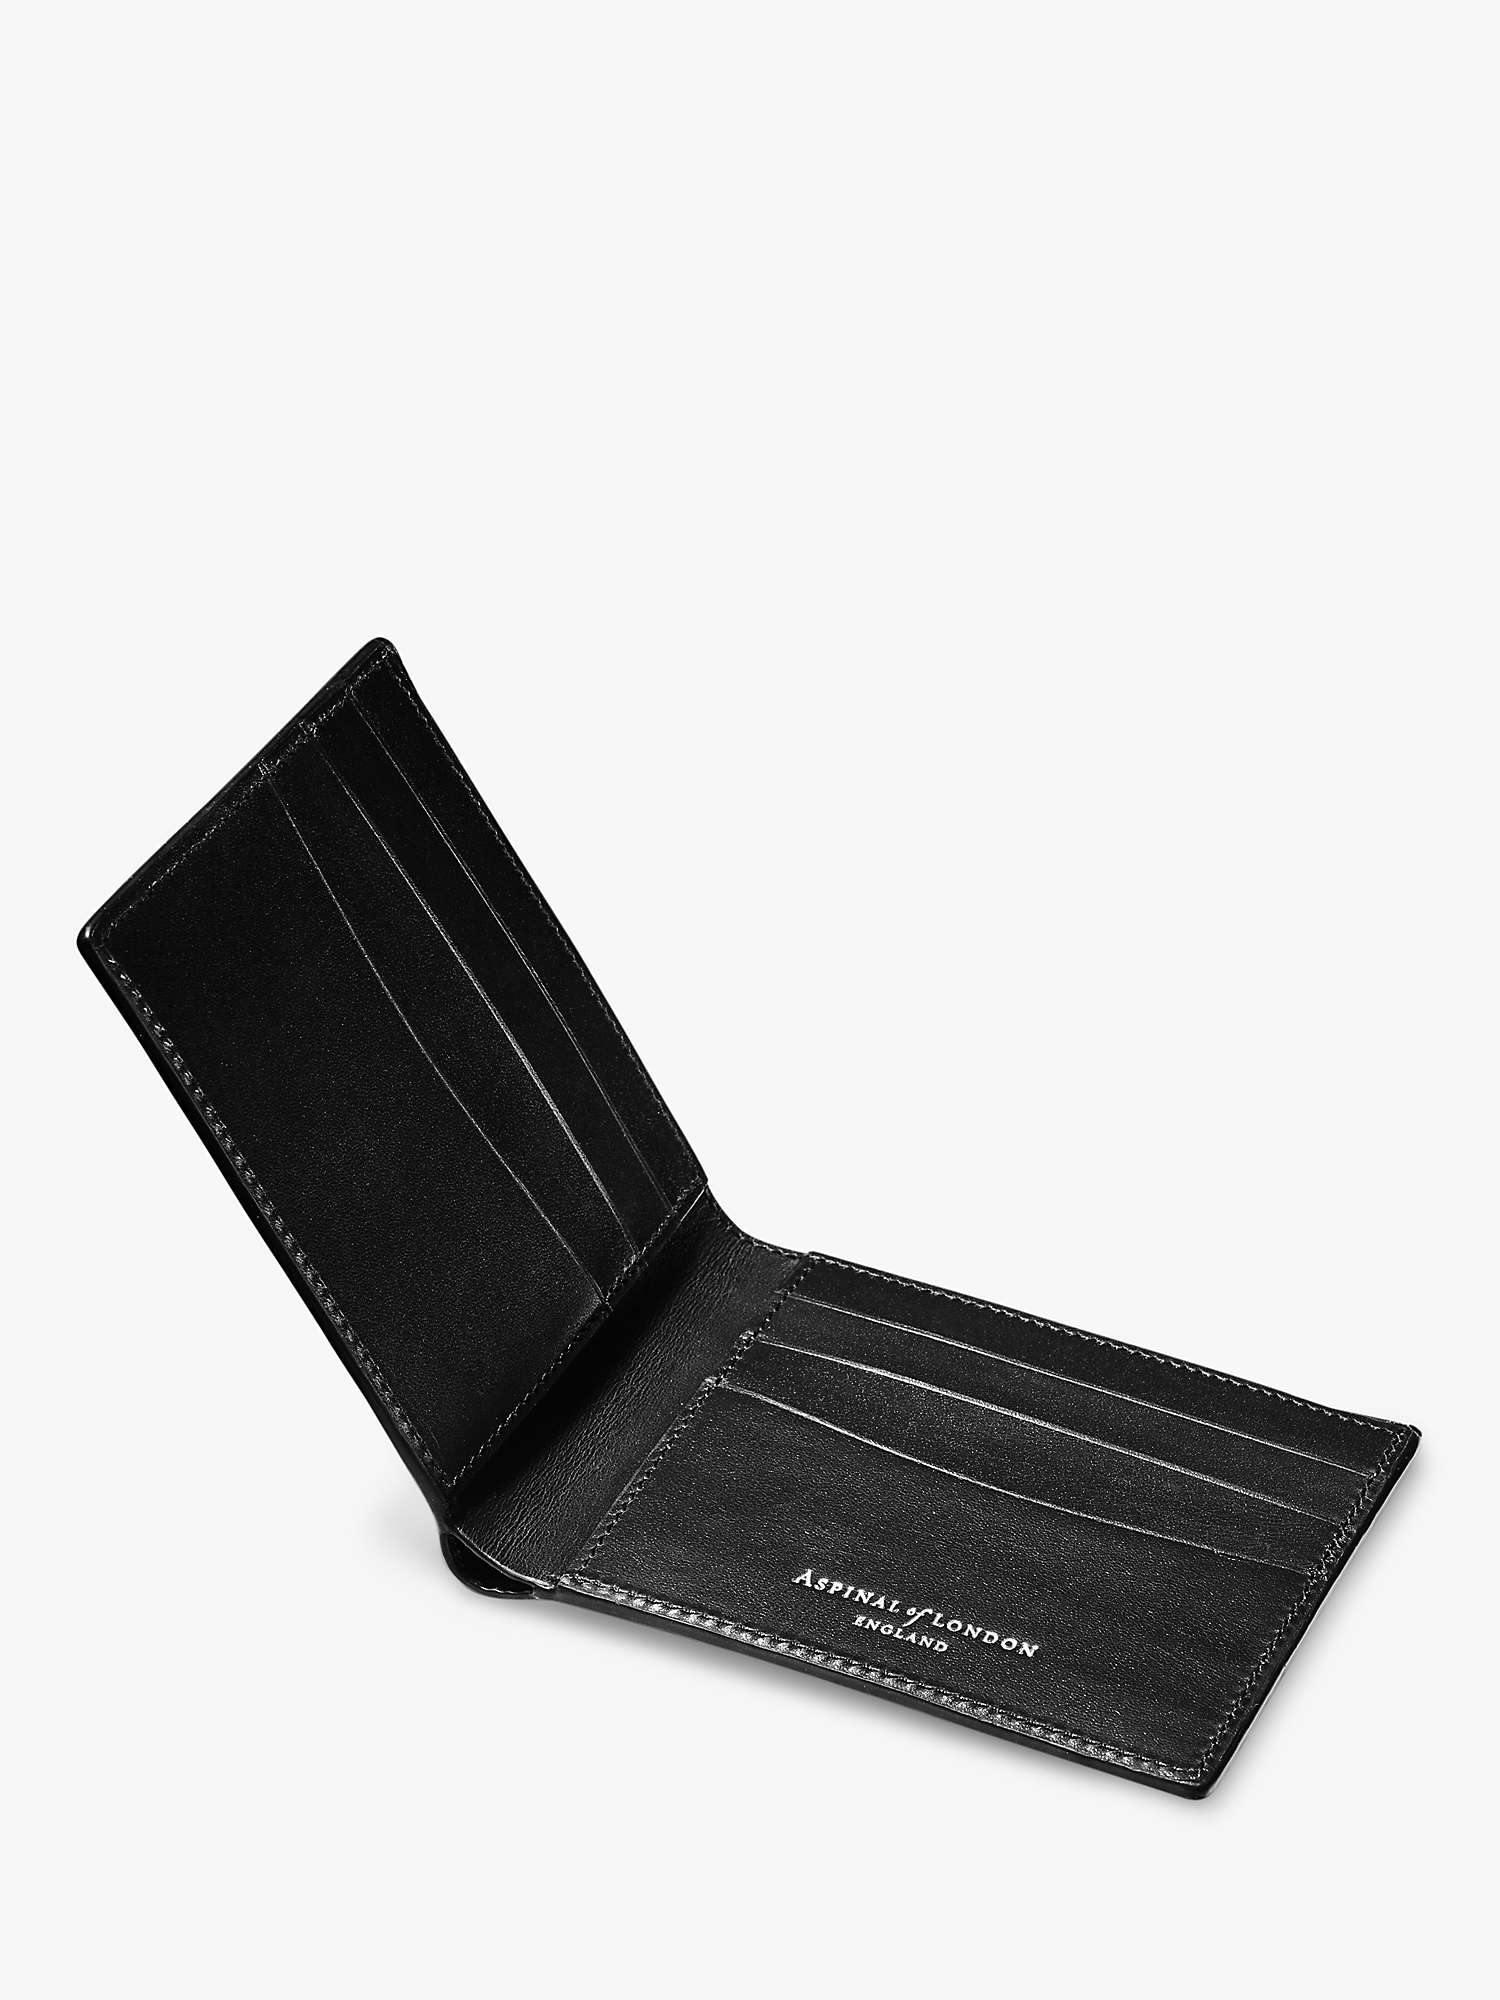 Buy Aspinal of London Billfold Saffiano Leather 6 Card Wallet Online at johnlewis.com